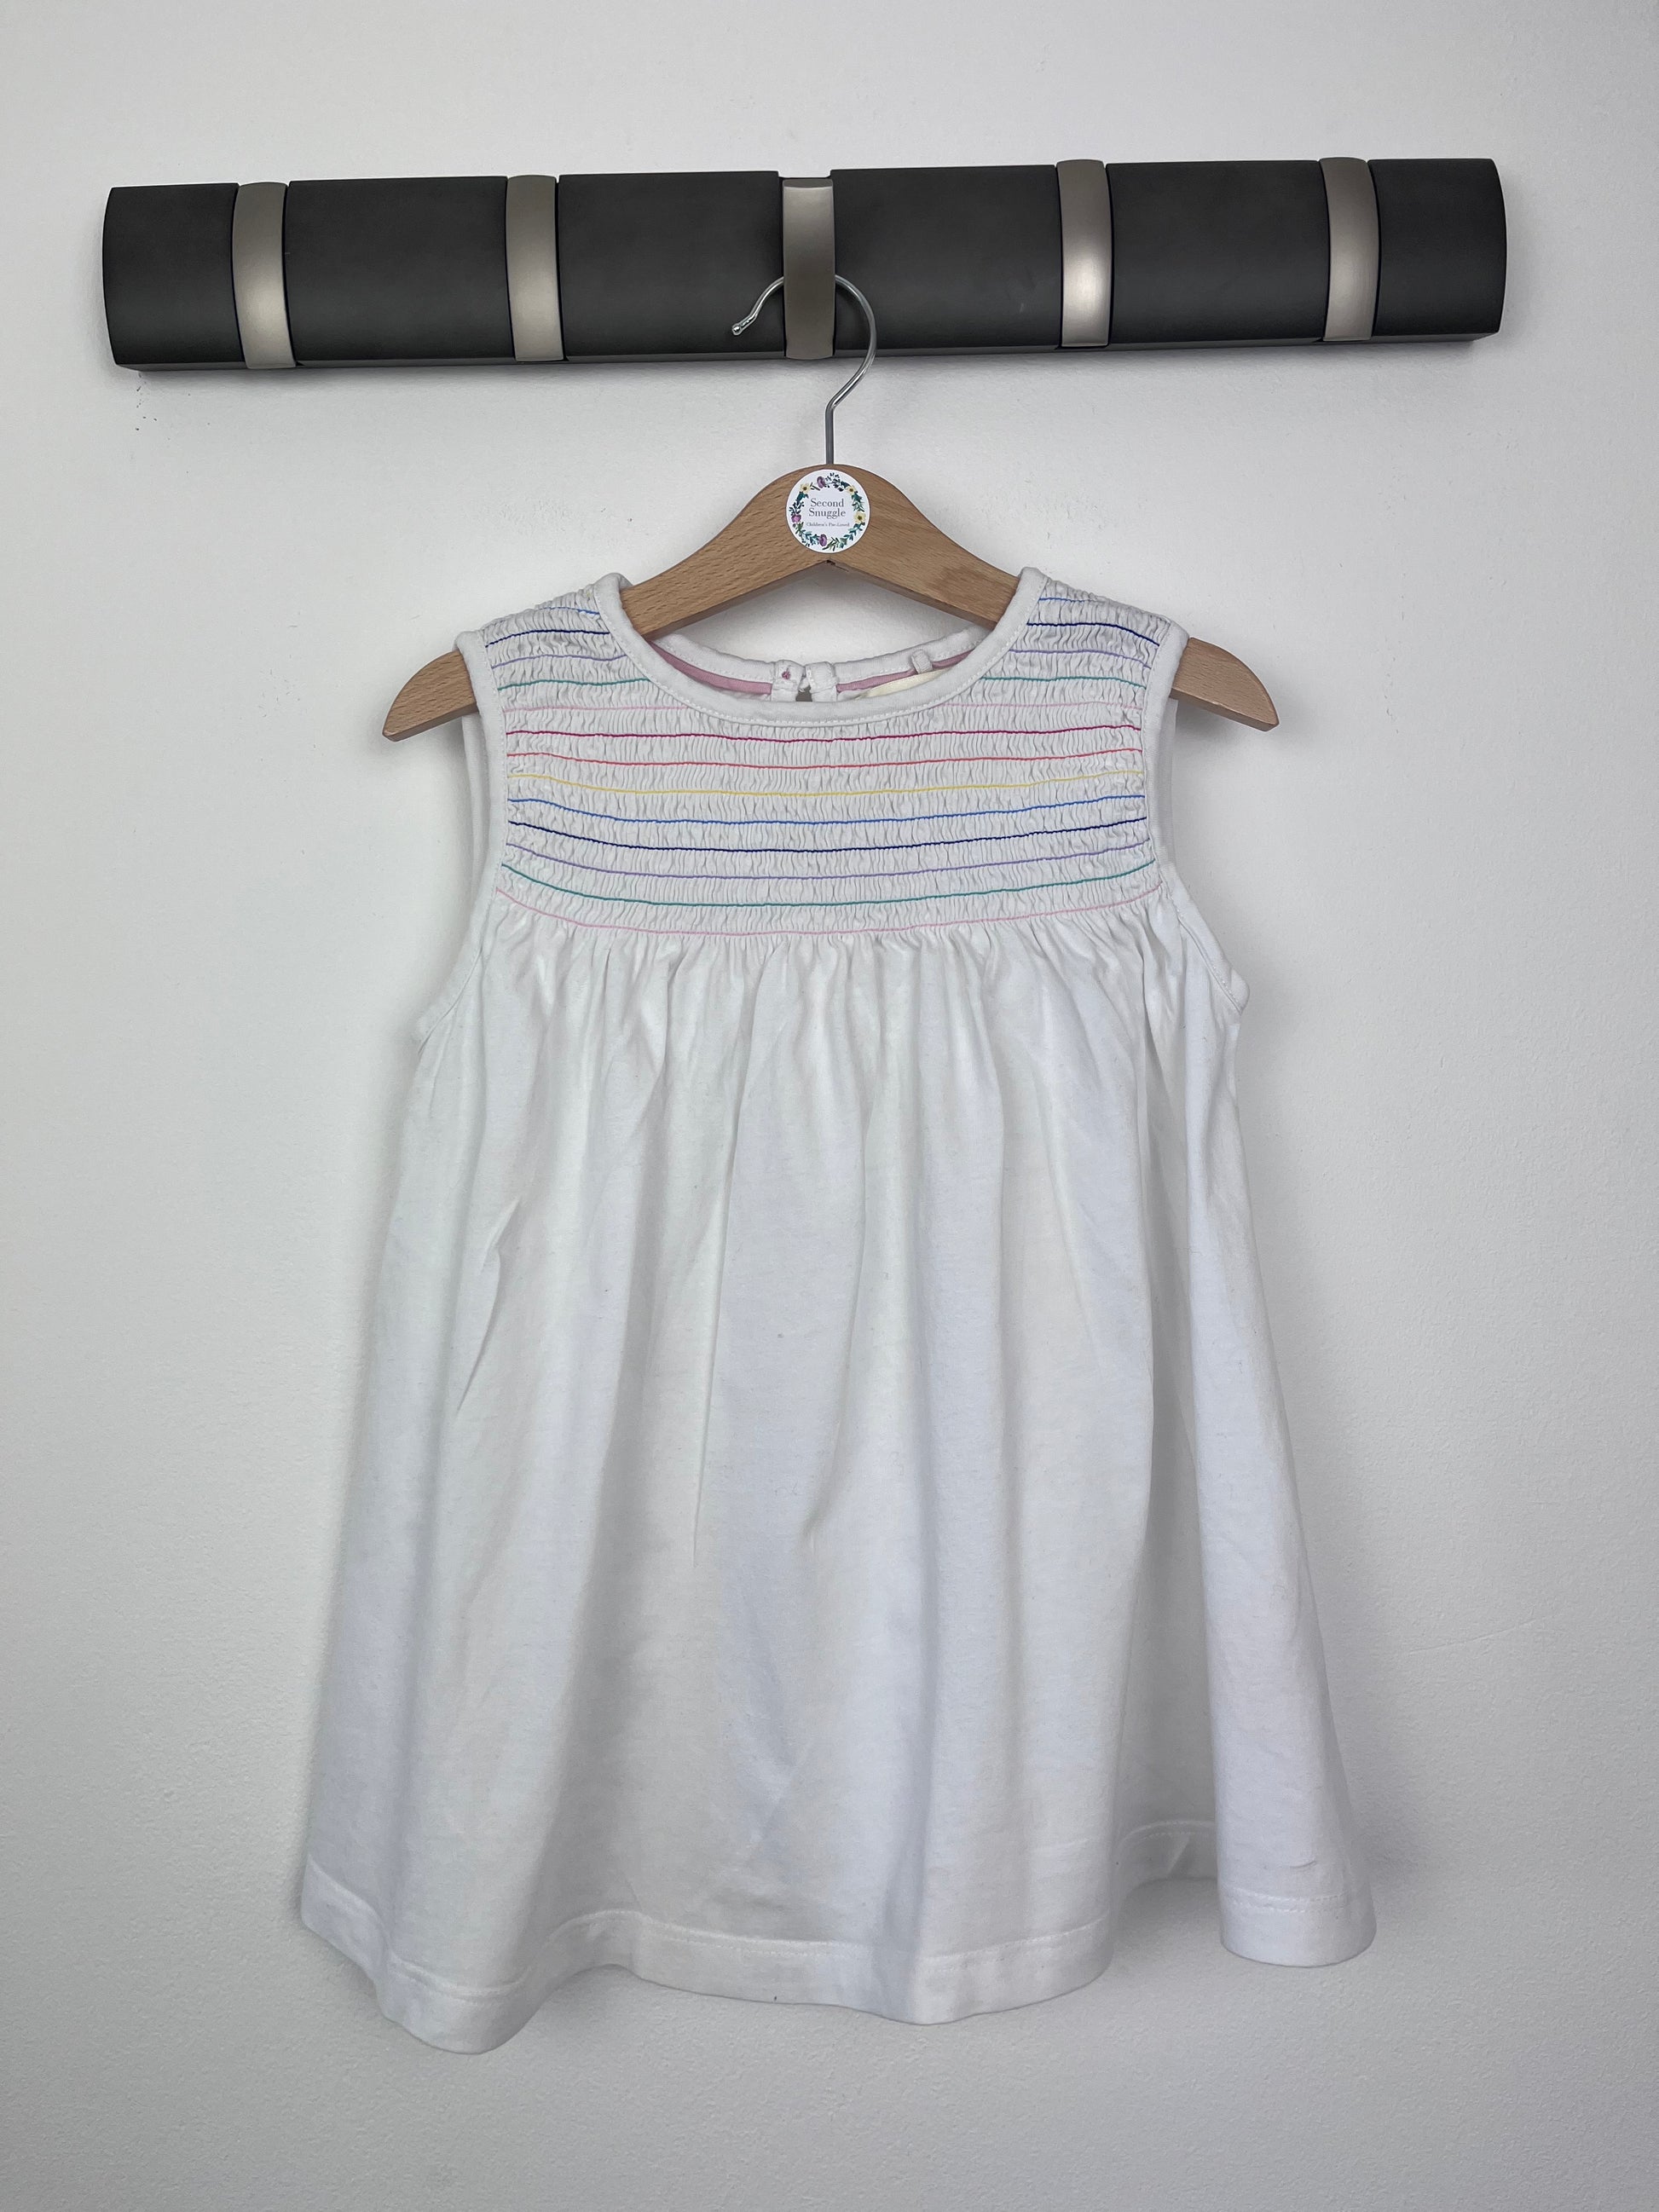 Mini Boden 4-5 Years-Tops-Second Snuggle Preloved